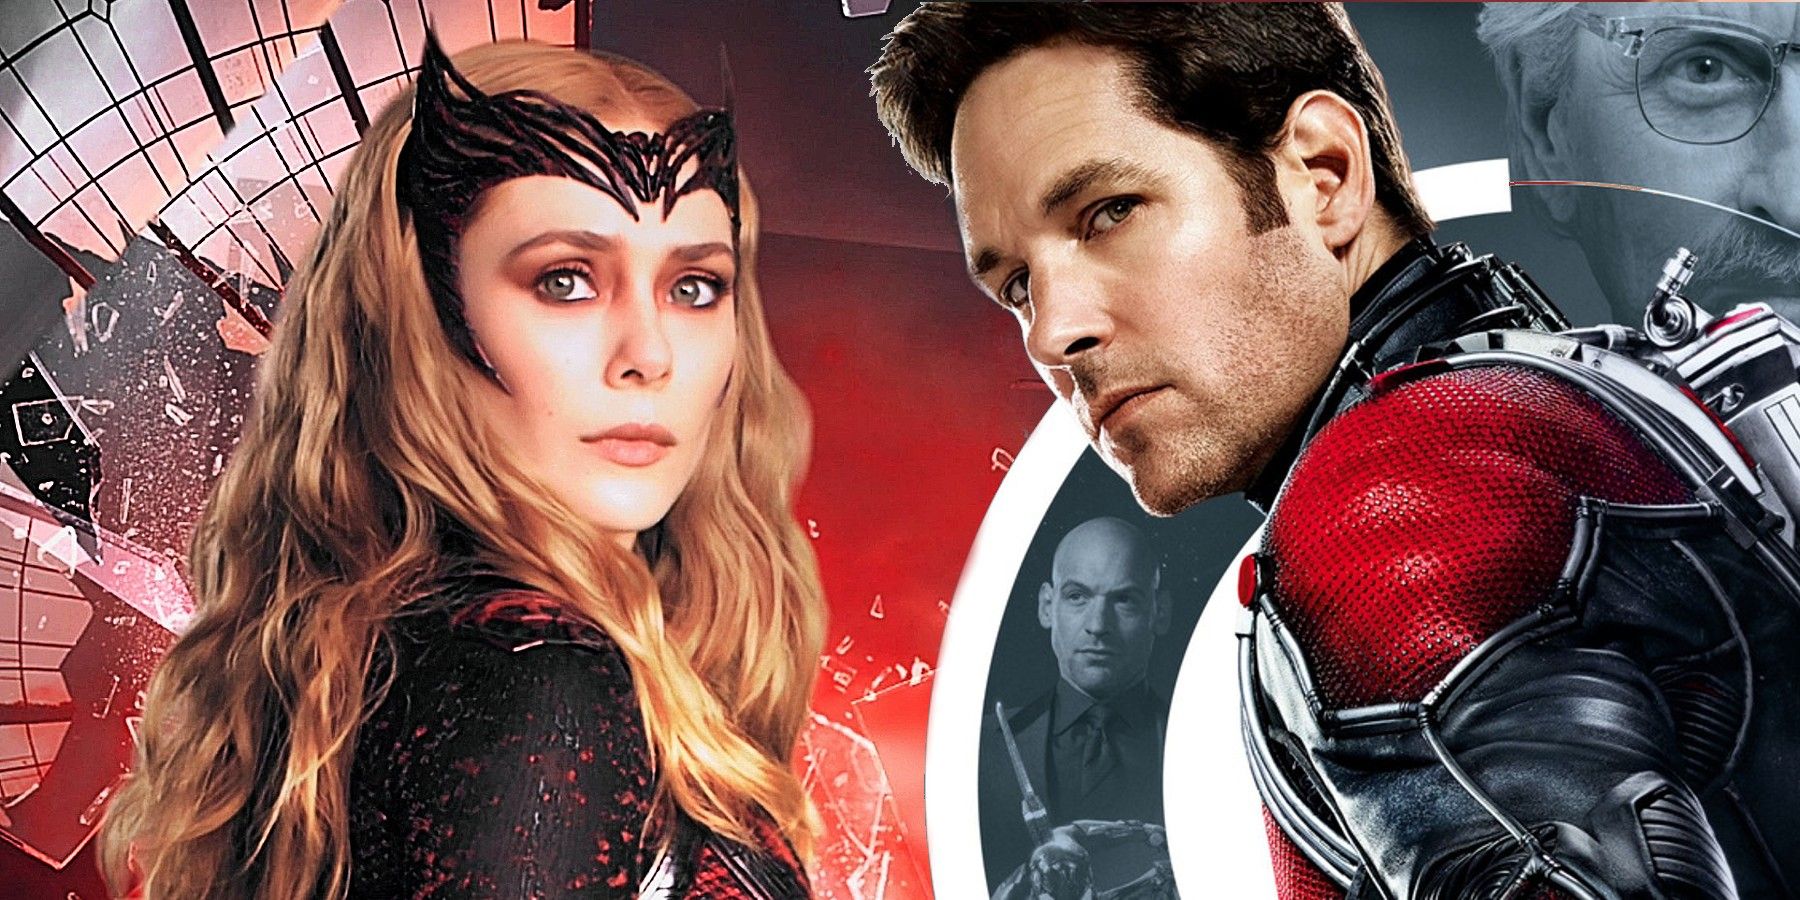 Wanda Maximoff-Scarlet Witch and Scott Lang-Ant-Man